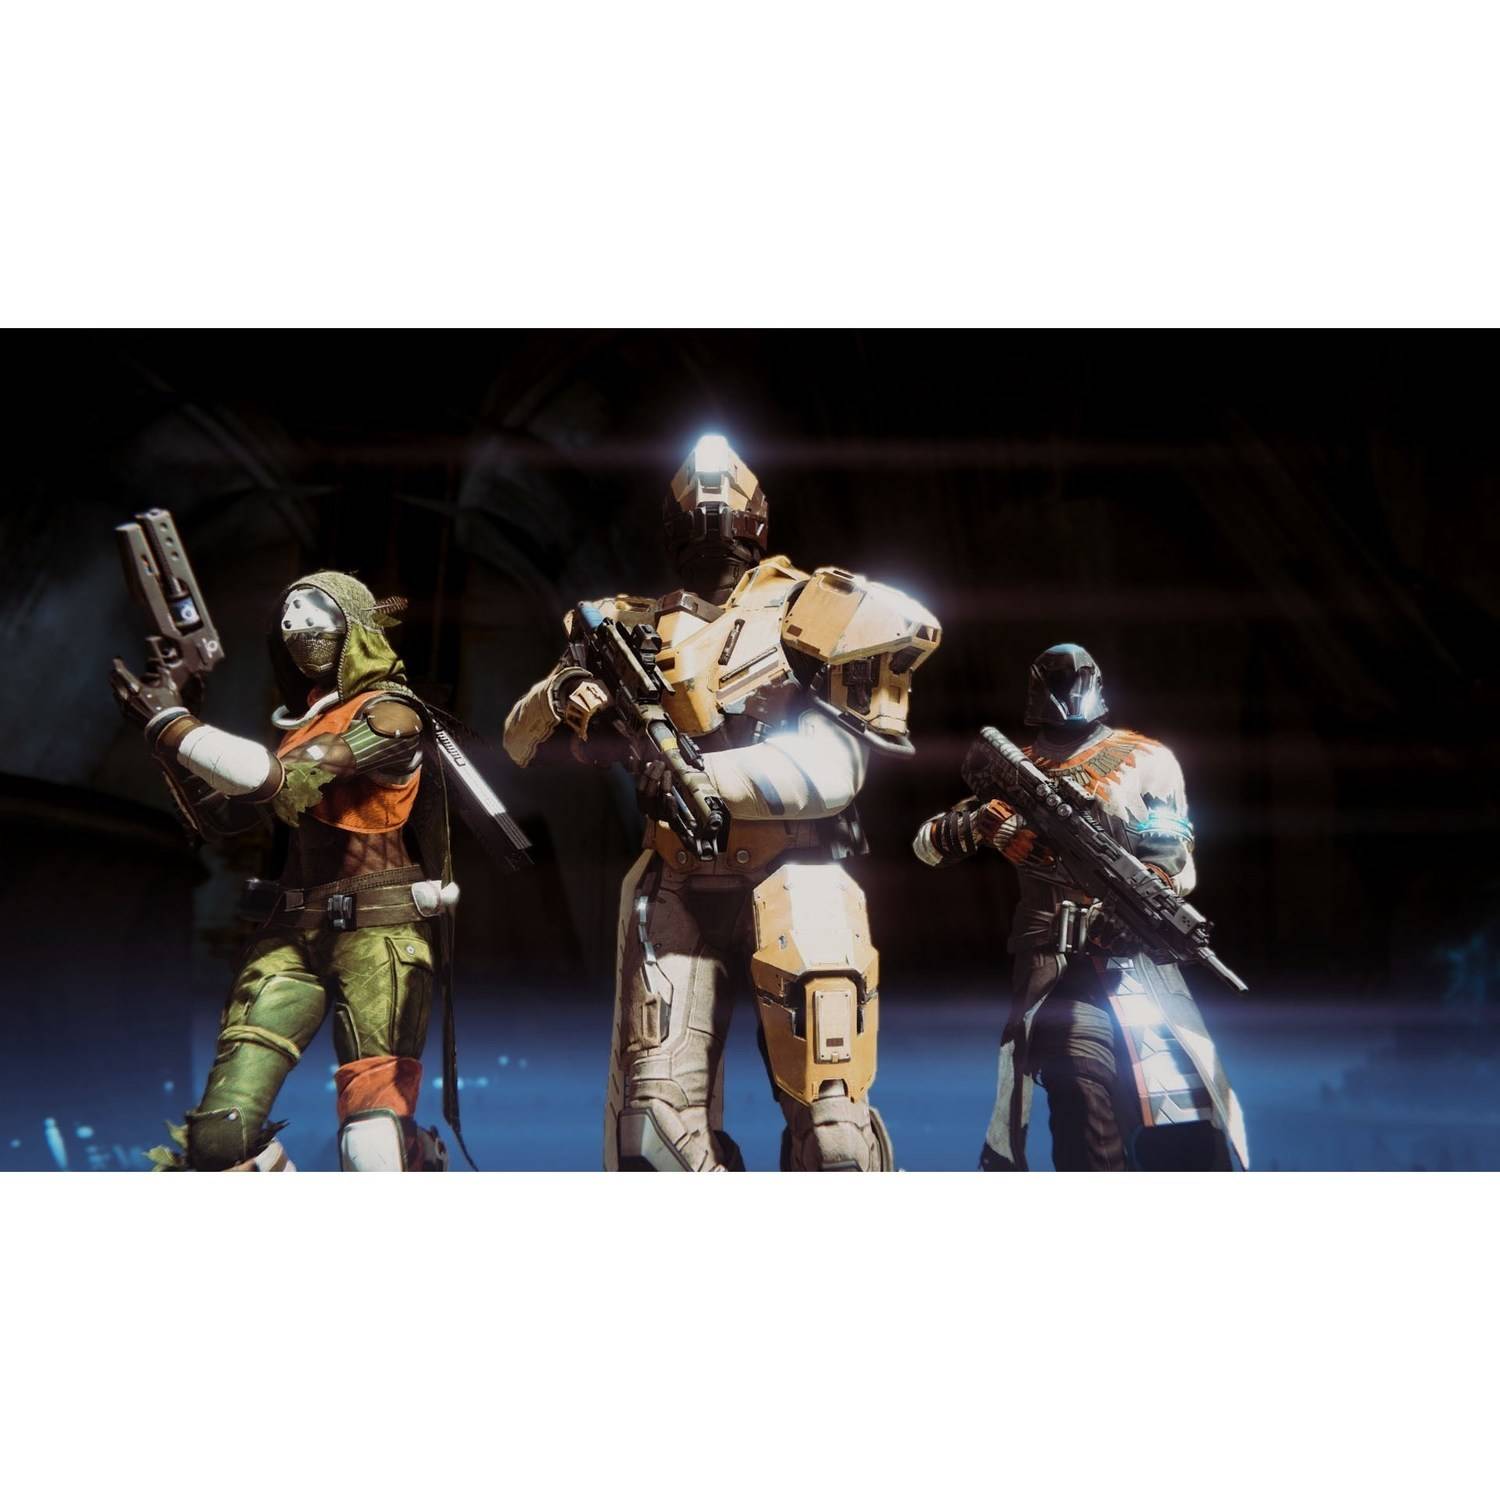 Destiny: The Taken King Legendary Edition, Activision, PlayStation 4, 047875874428 - image 12 of 31